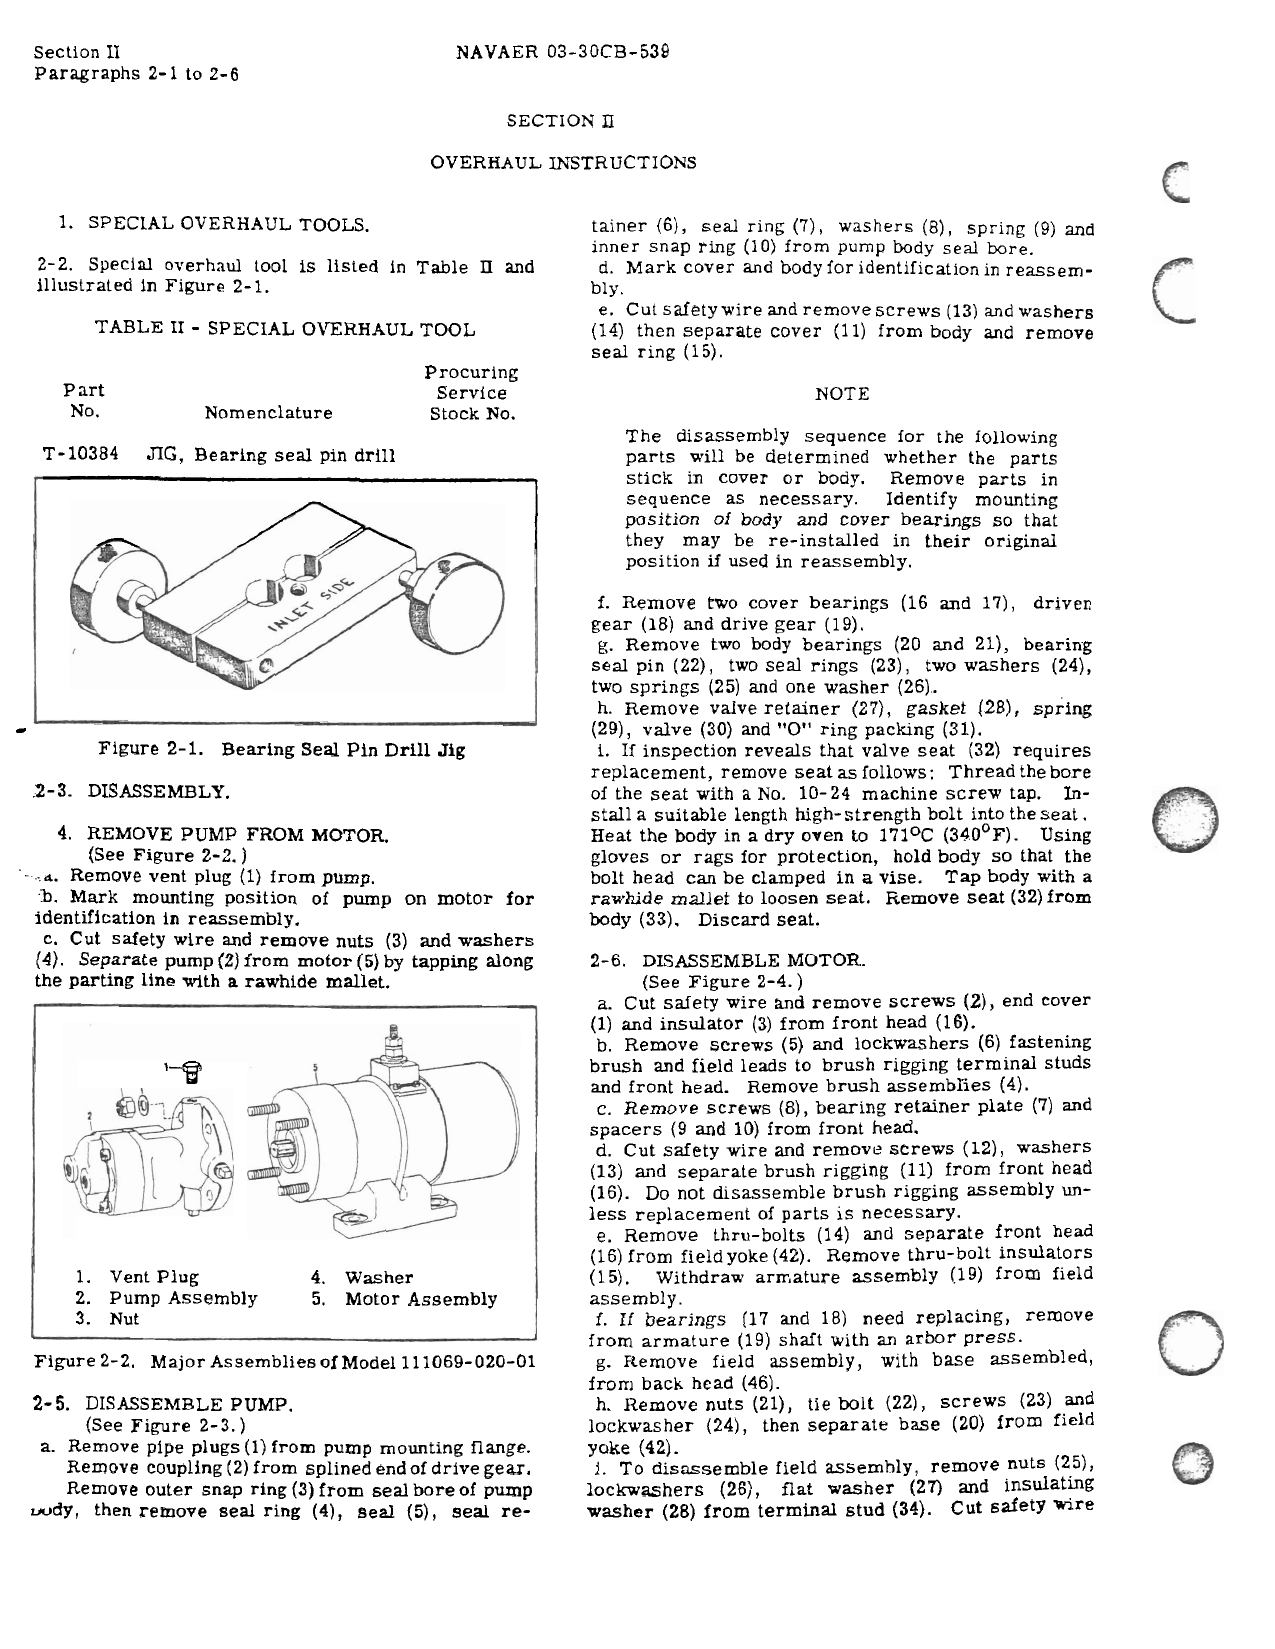 Sample page 5 from AirCorps Library document: Overhaul Instructions for Electric Motor-Driven Hydraulic Gear Type Pump - 111069 Series